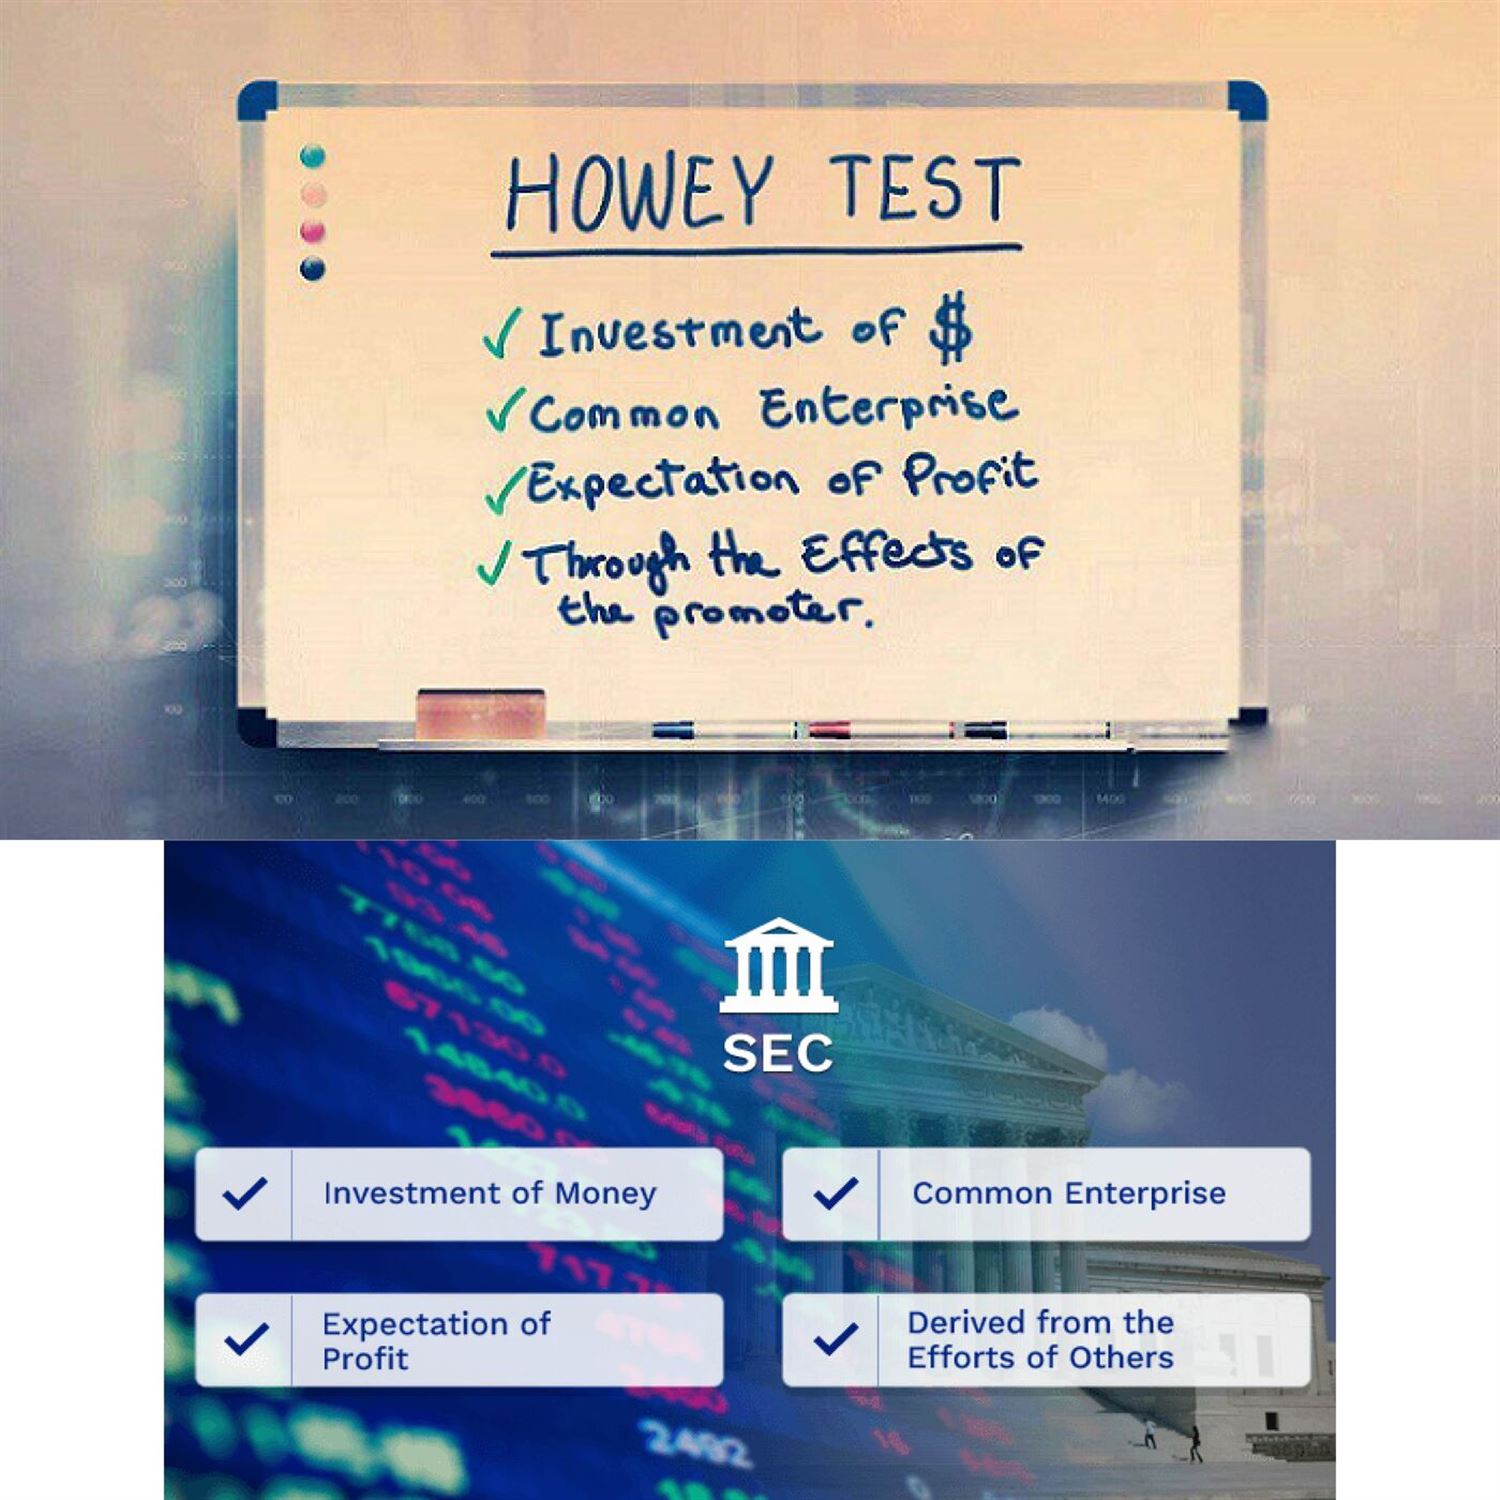 Only one cryptocurrency (BTC) and the Howey Test